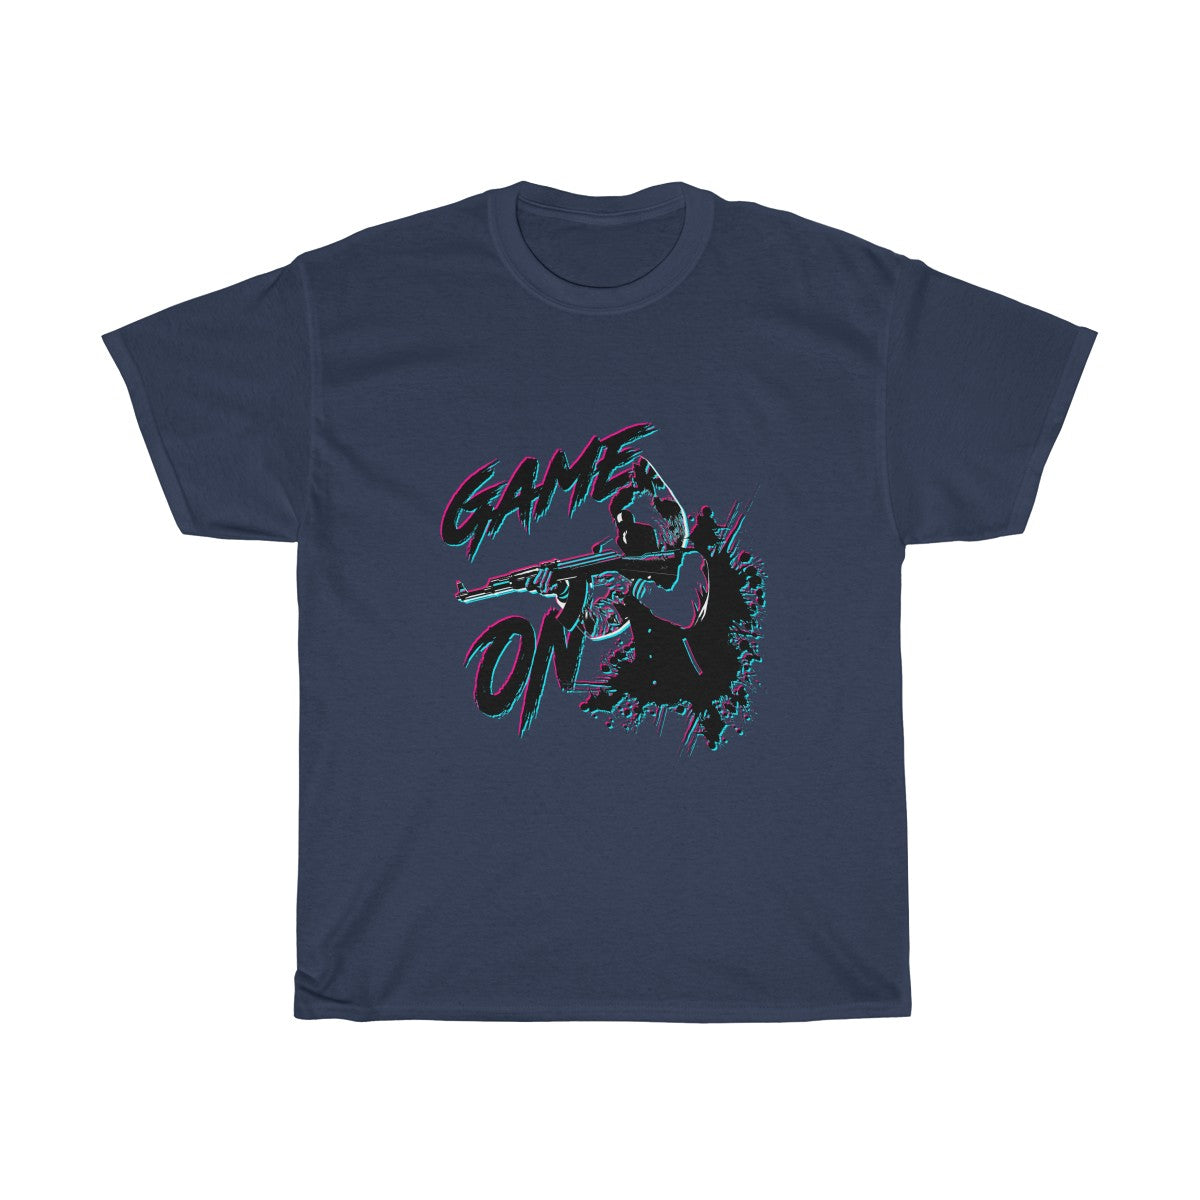 Game On - T-Shirt T-Shirt Corey Coyote Navy Blue S 